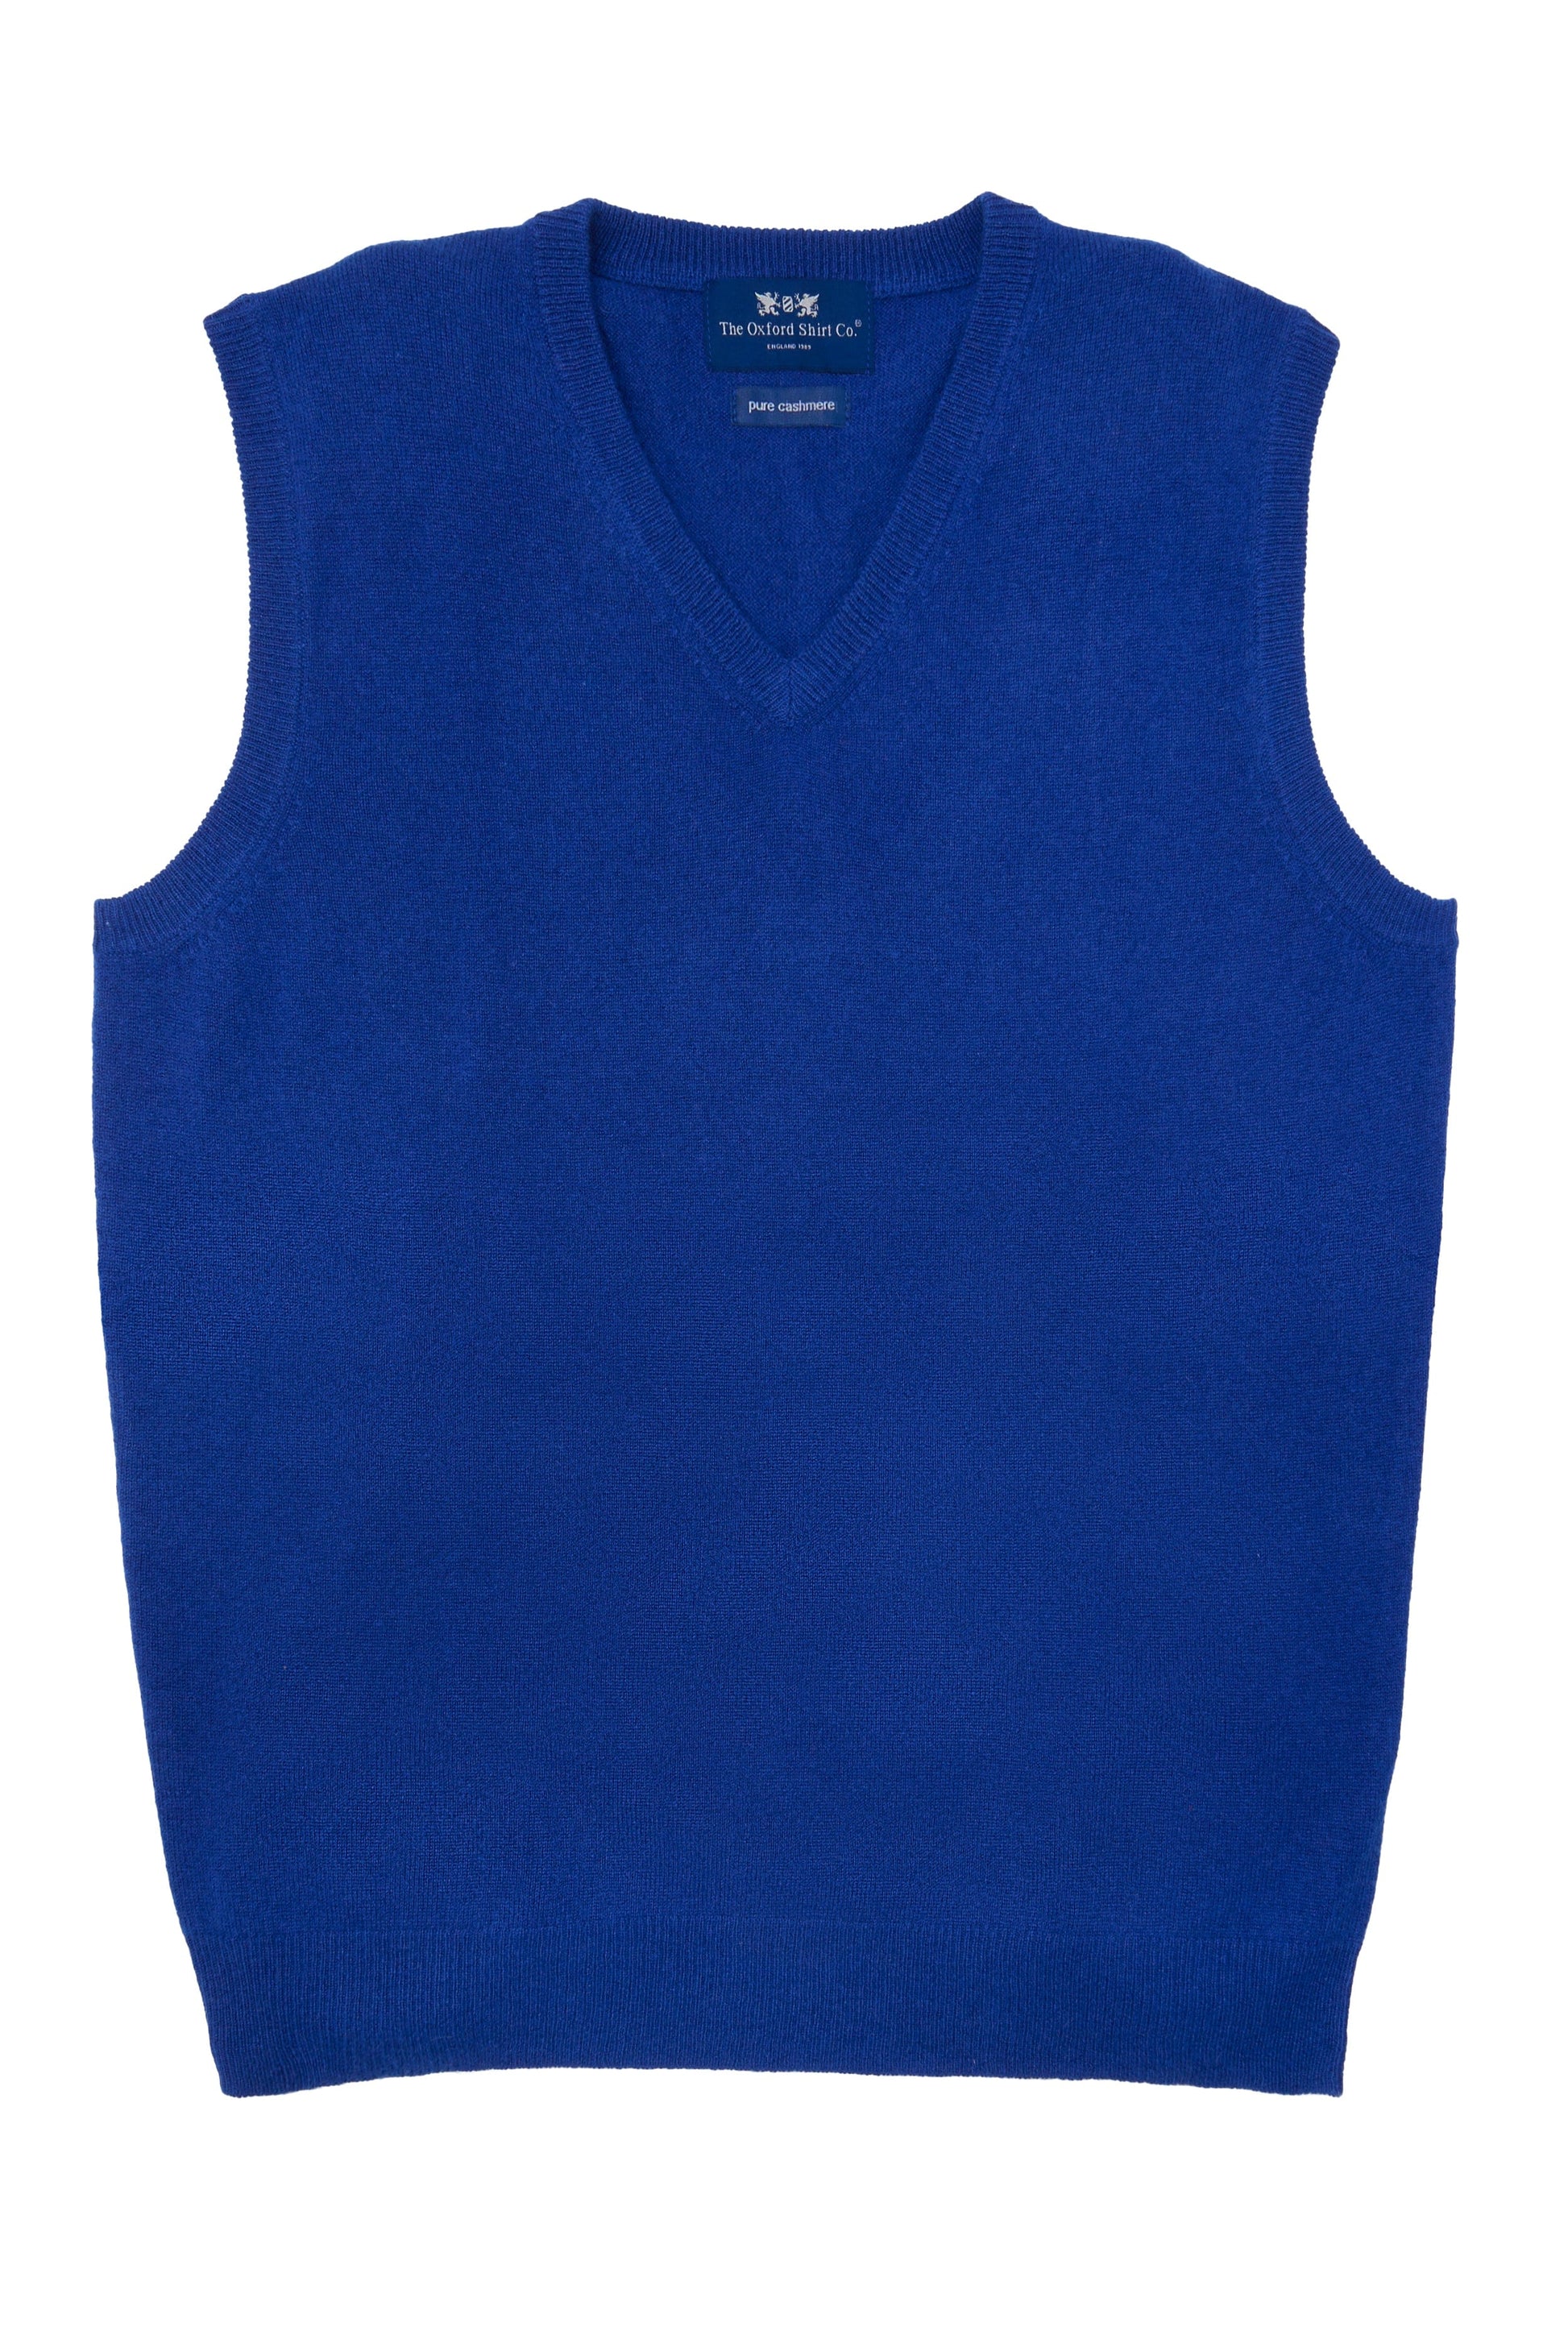 Cashmere Sleeveless in Ultra Blue